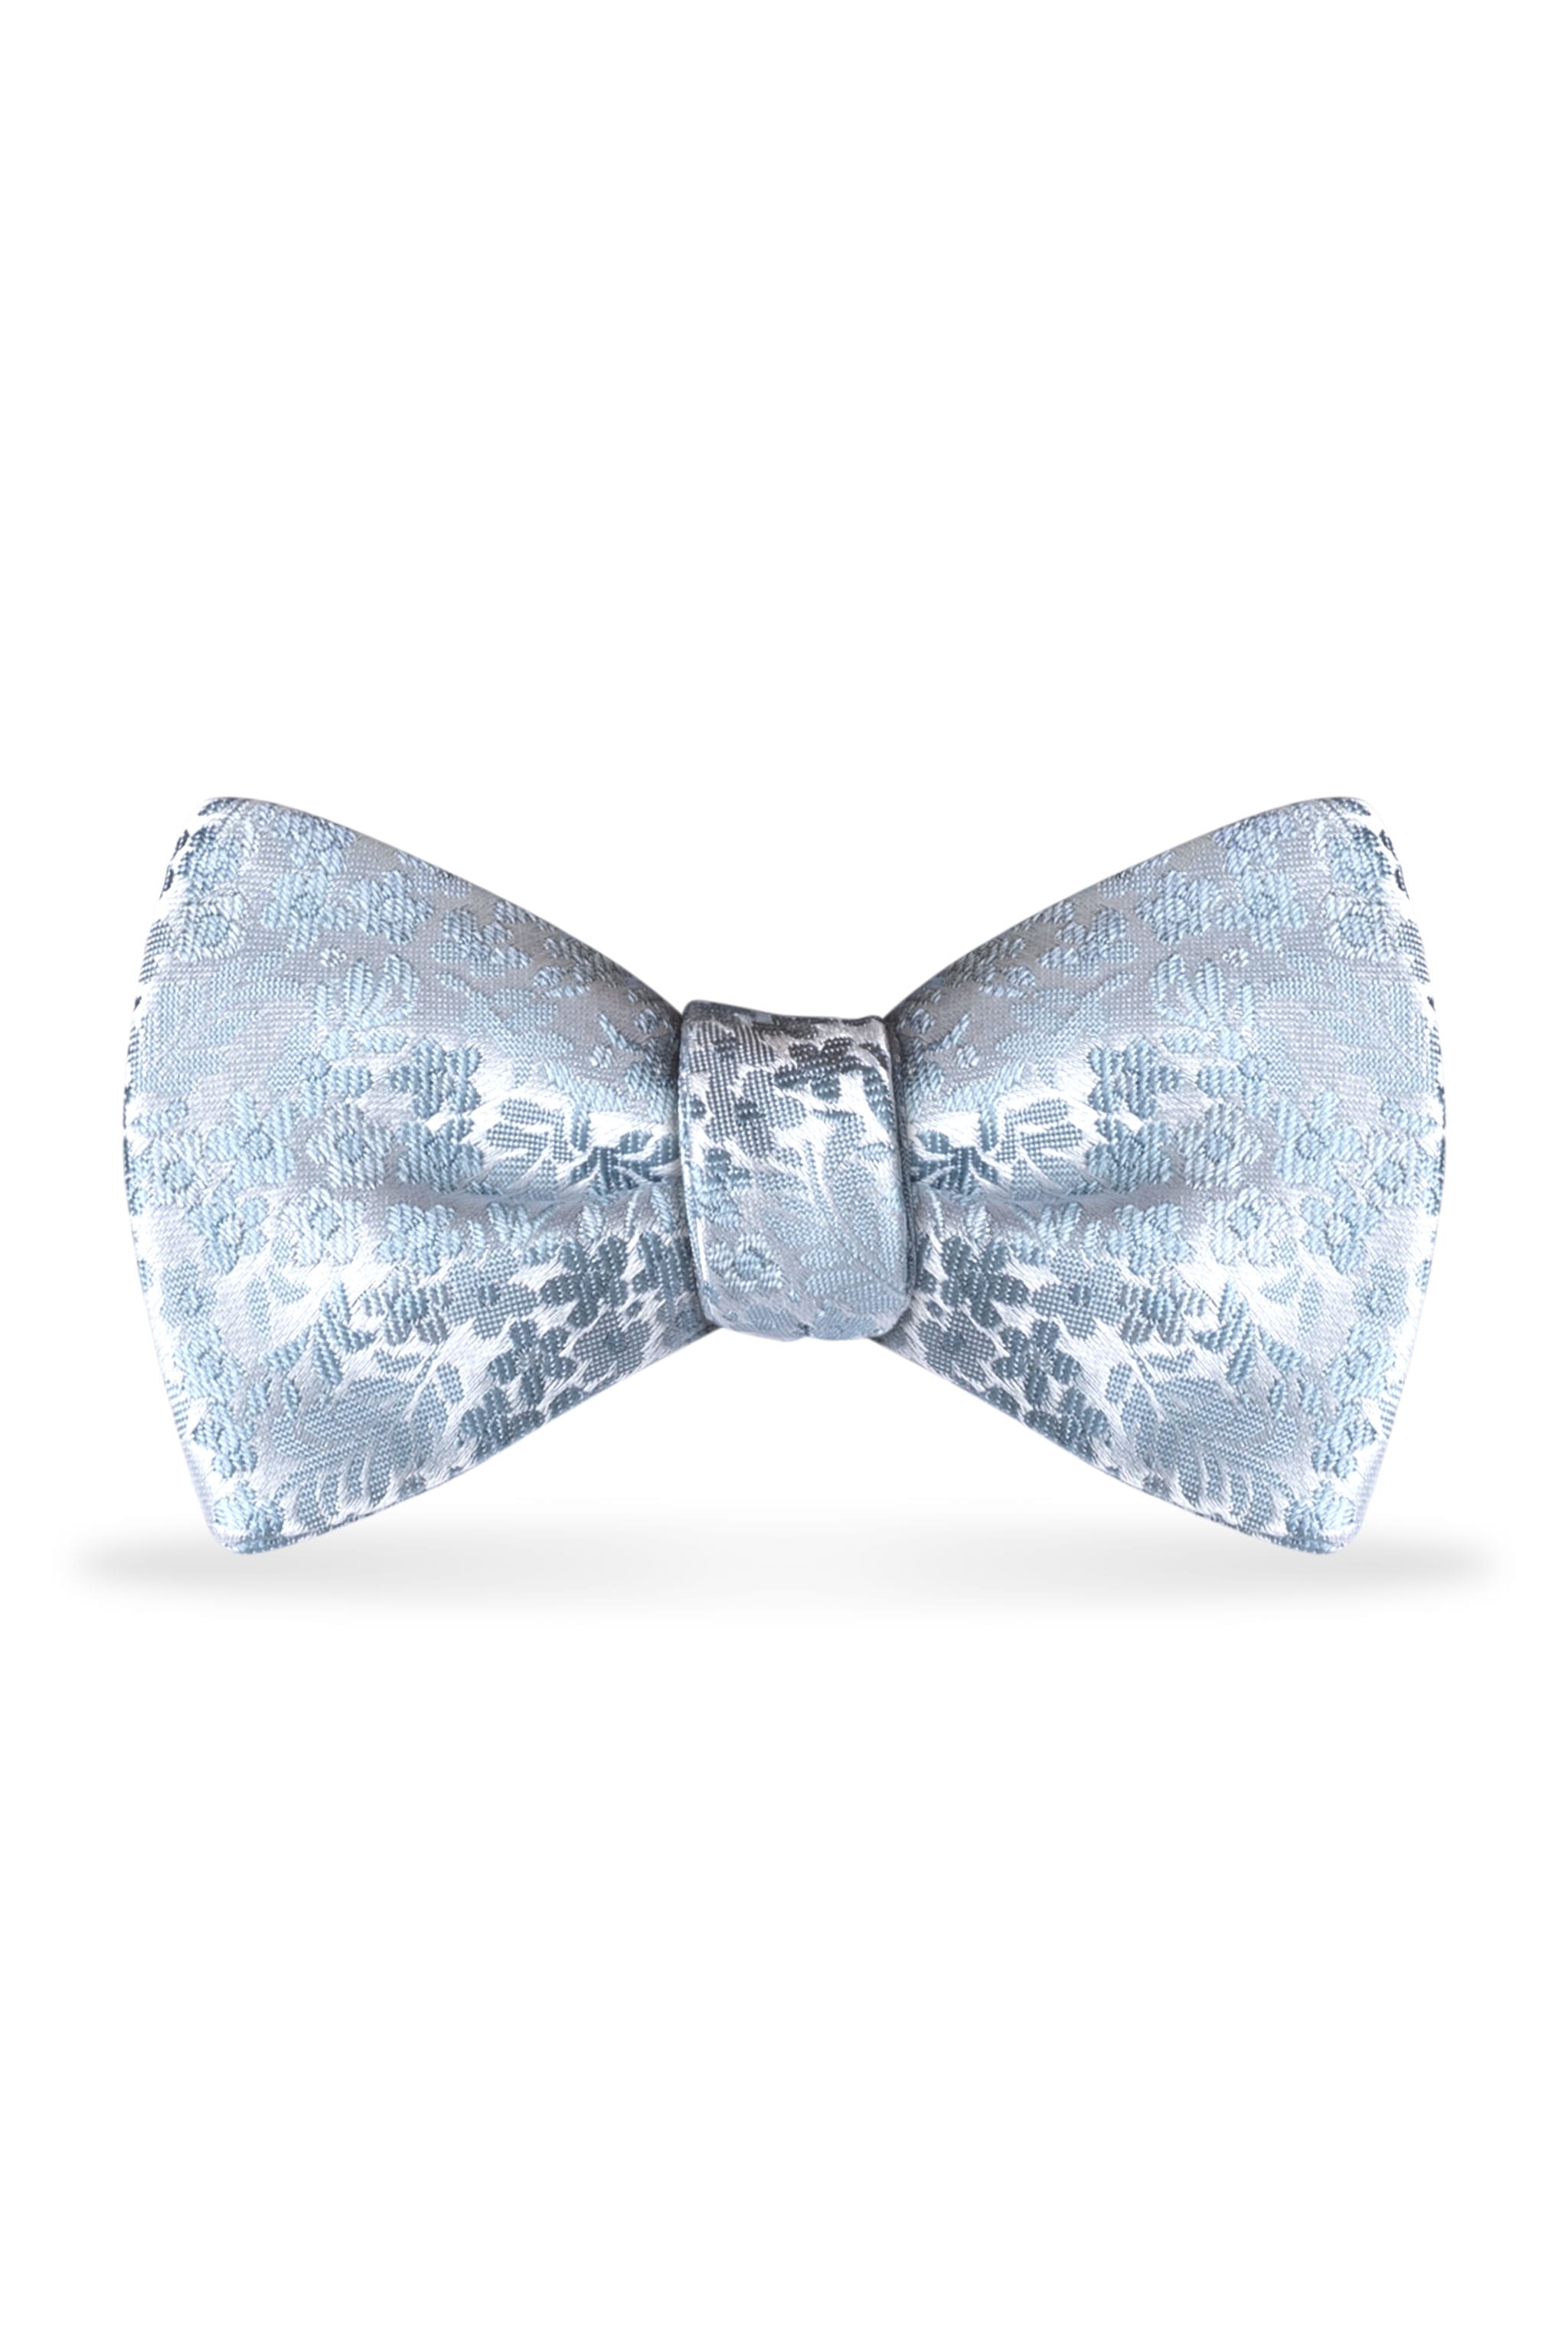 Floral Dusty Blue Bow Tie